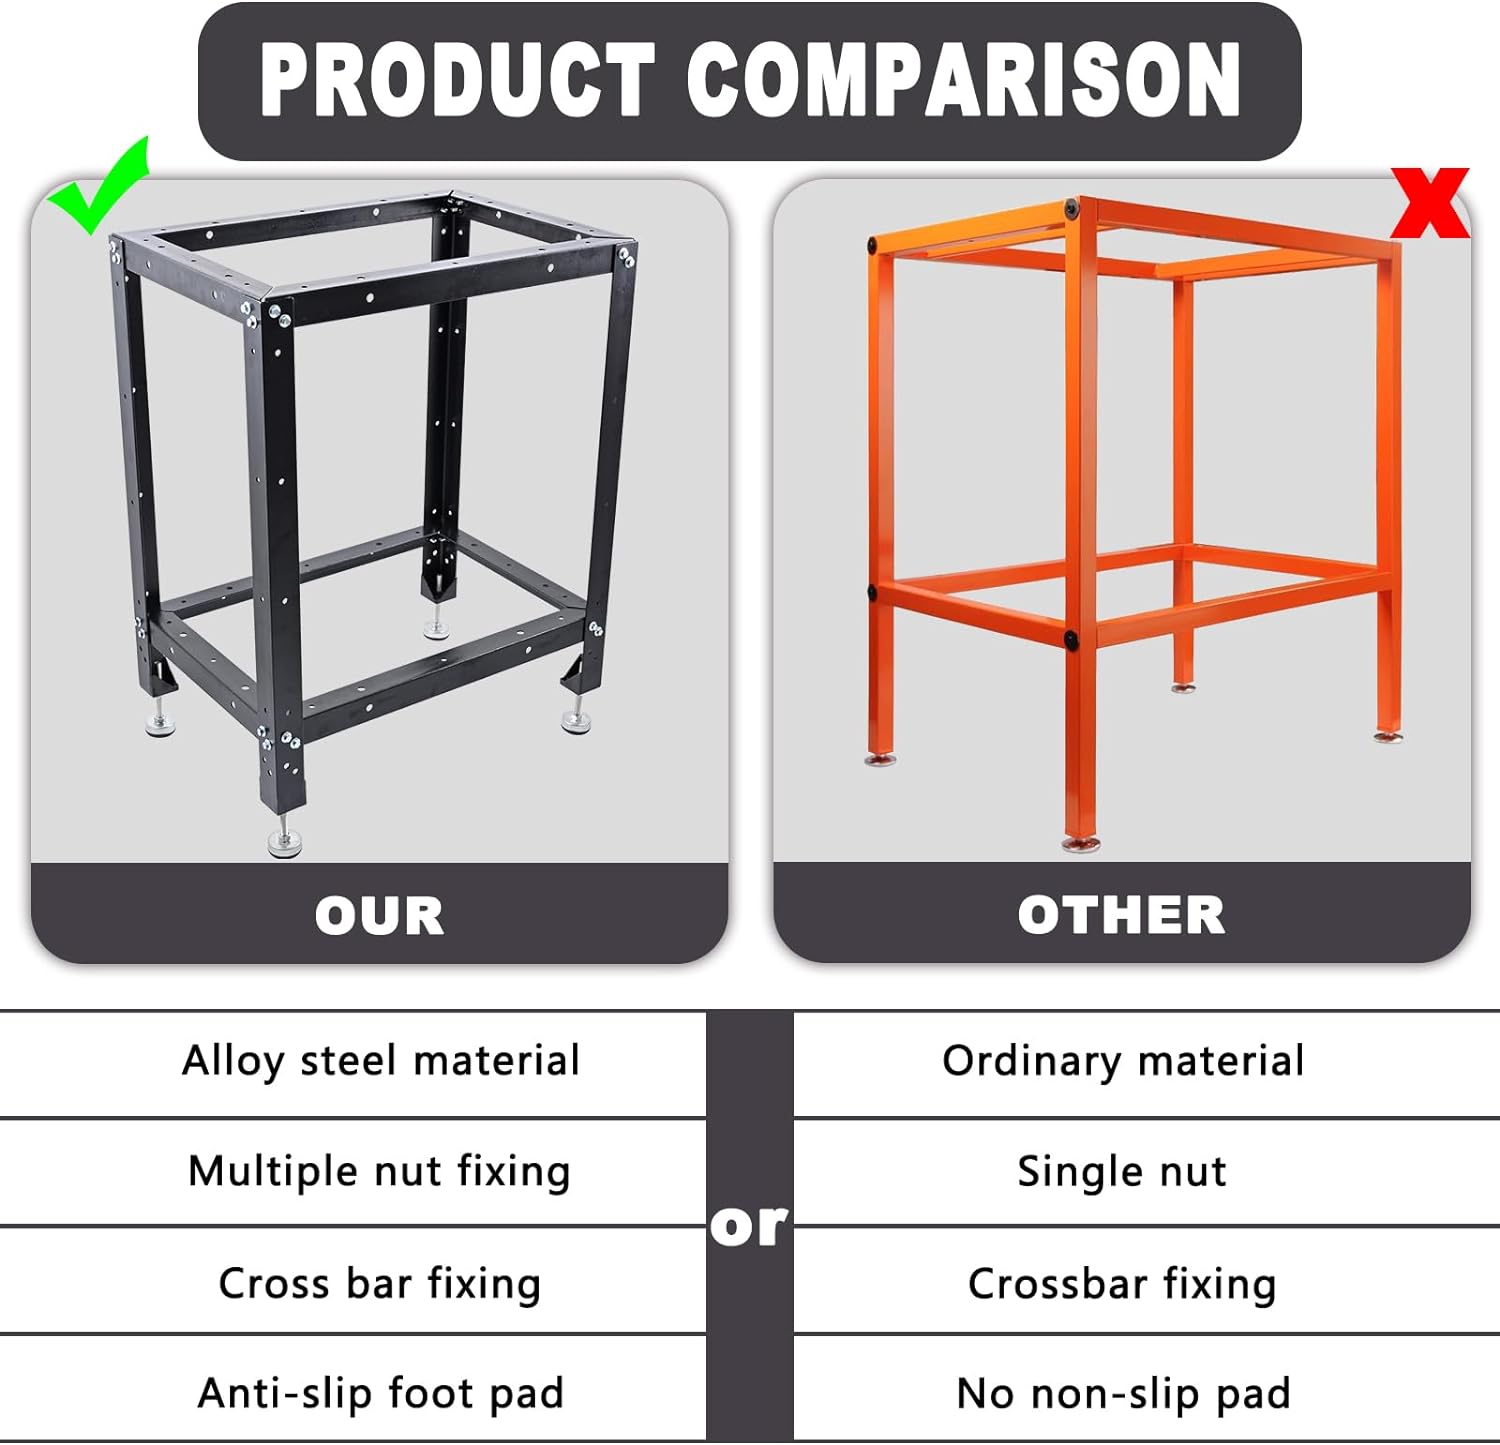 Gazzyt Utility Work Stand Alloy Steel Multi-Purpose Shop Stand with Adjustable Legs for Accessory Workbenches for Shop